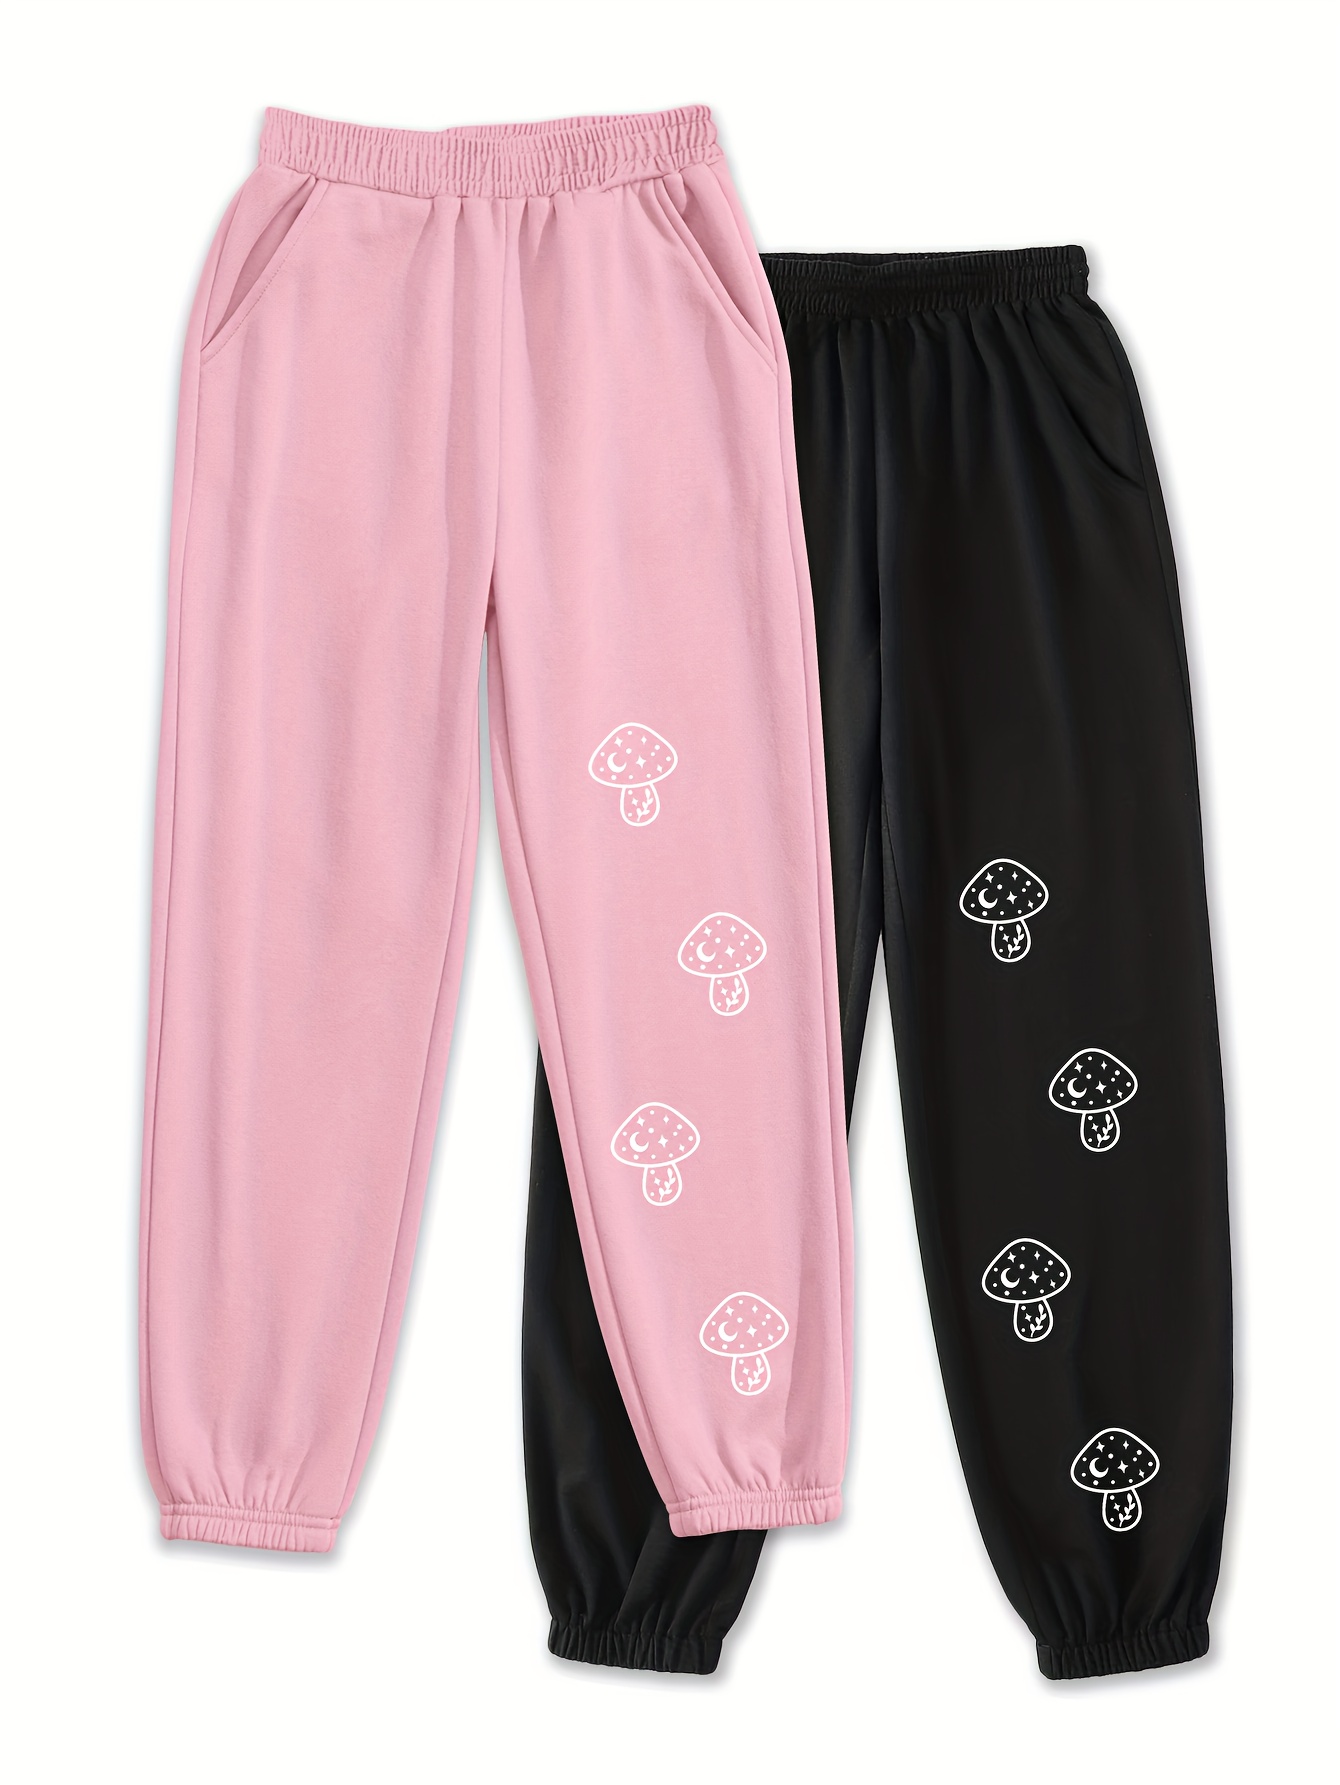 KaLI_store Sweatpants for Girls Girls Joggers Sweatpants Kids Cargo Loose  High Waisted Pants with Pockets,Pink